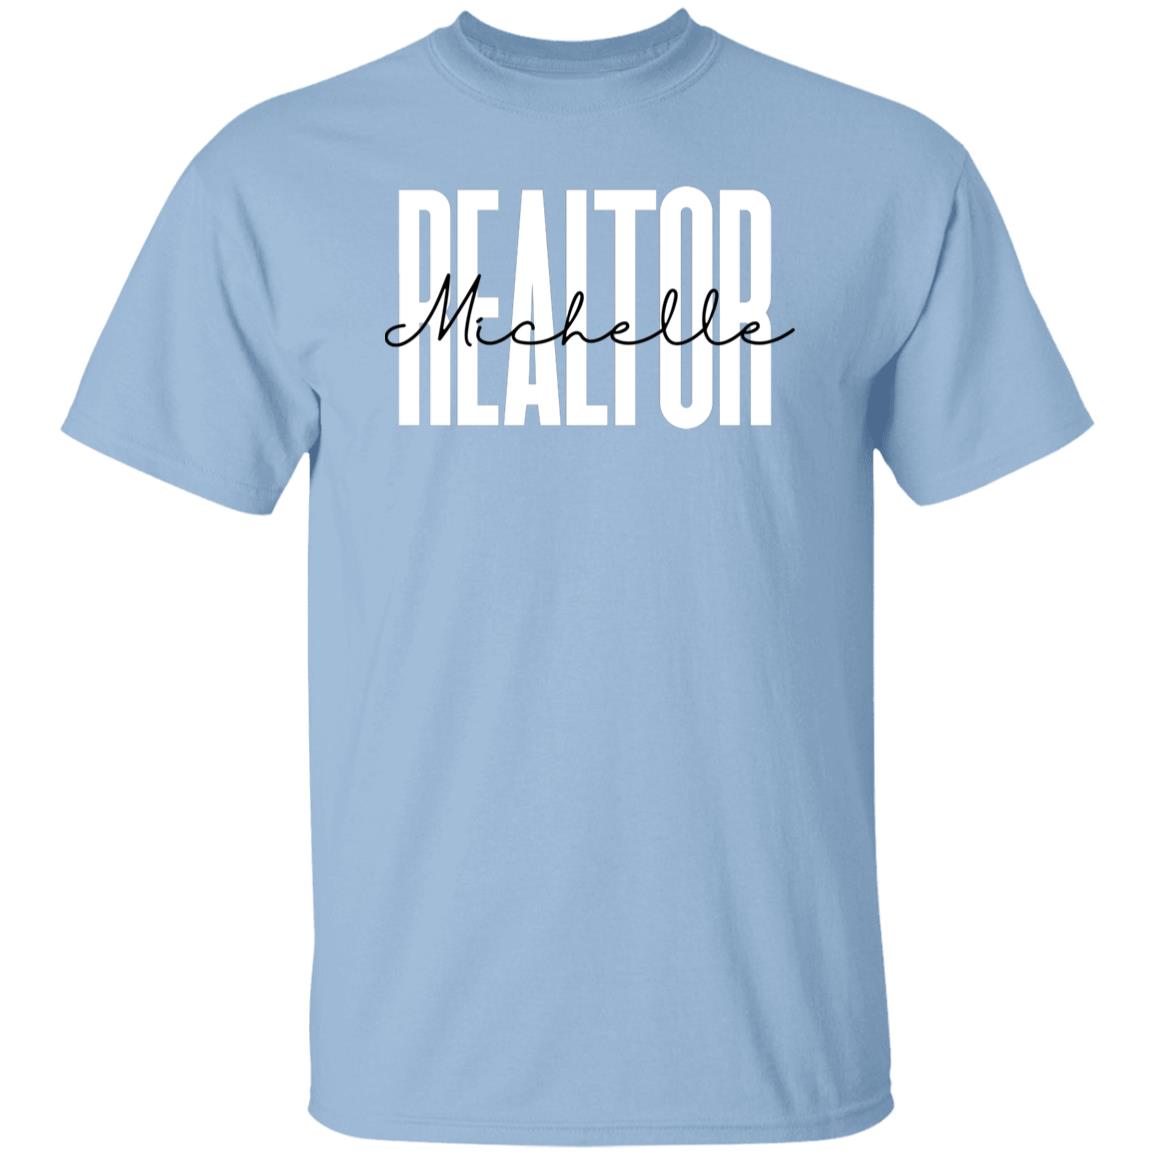 Personalized Realtor Unisex T-shirt gift for real estate agent Sand Pink Light Blue-Family-Gift-Planet